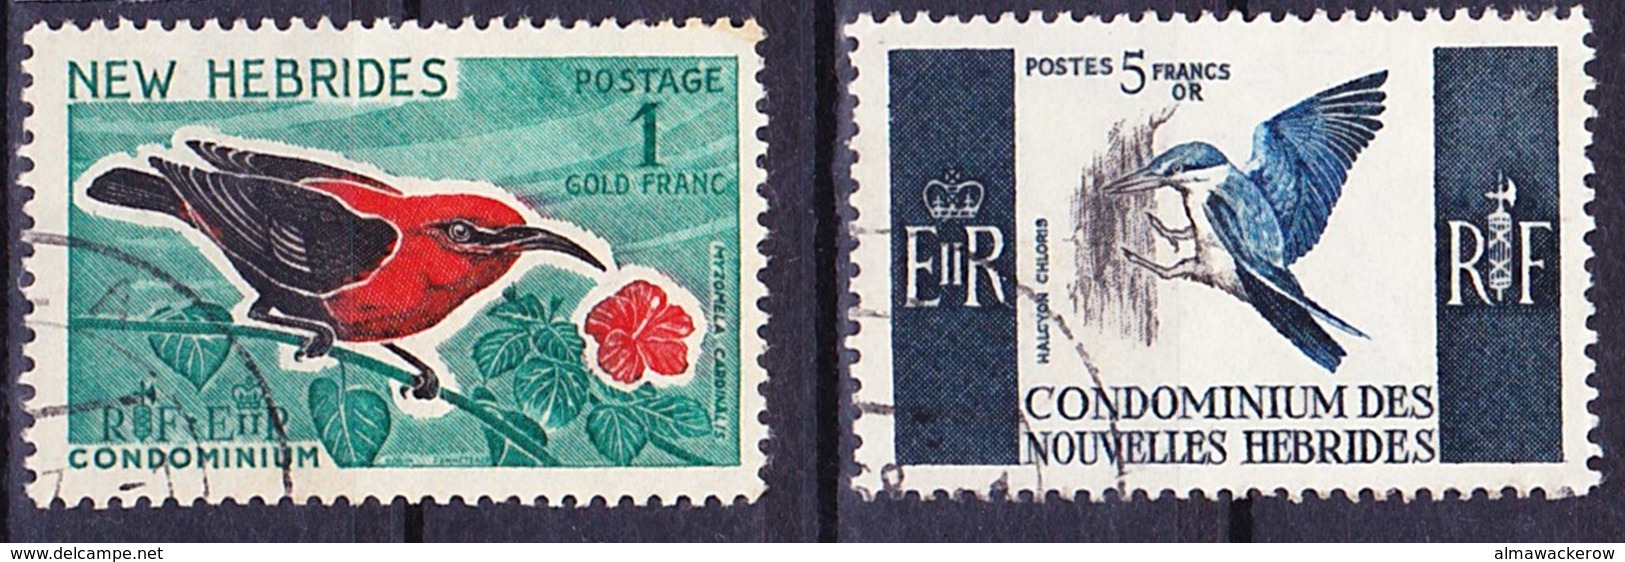 New Hebrides 1966 Bird Definitives Mi 238, 243; Yv 244, 255 Used O, I Sell My Collection! - Oblitérés